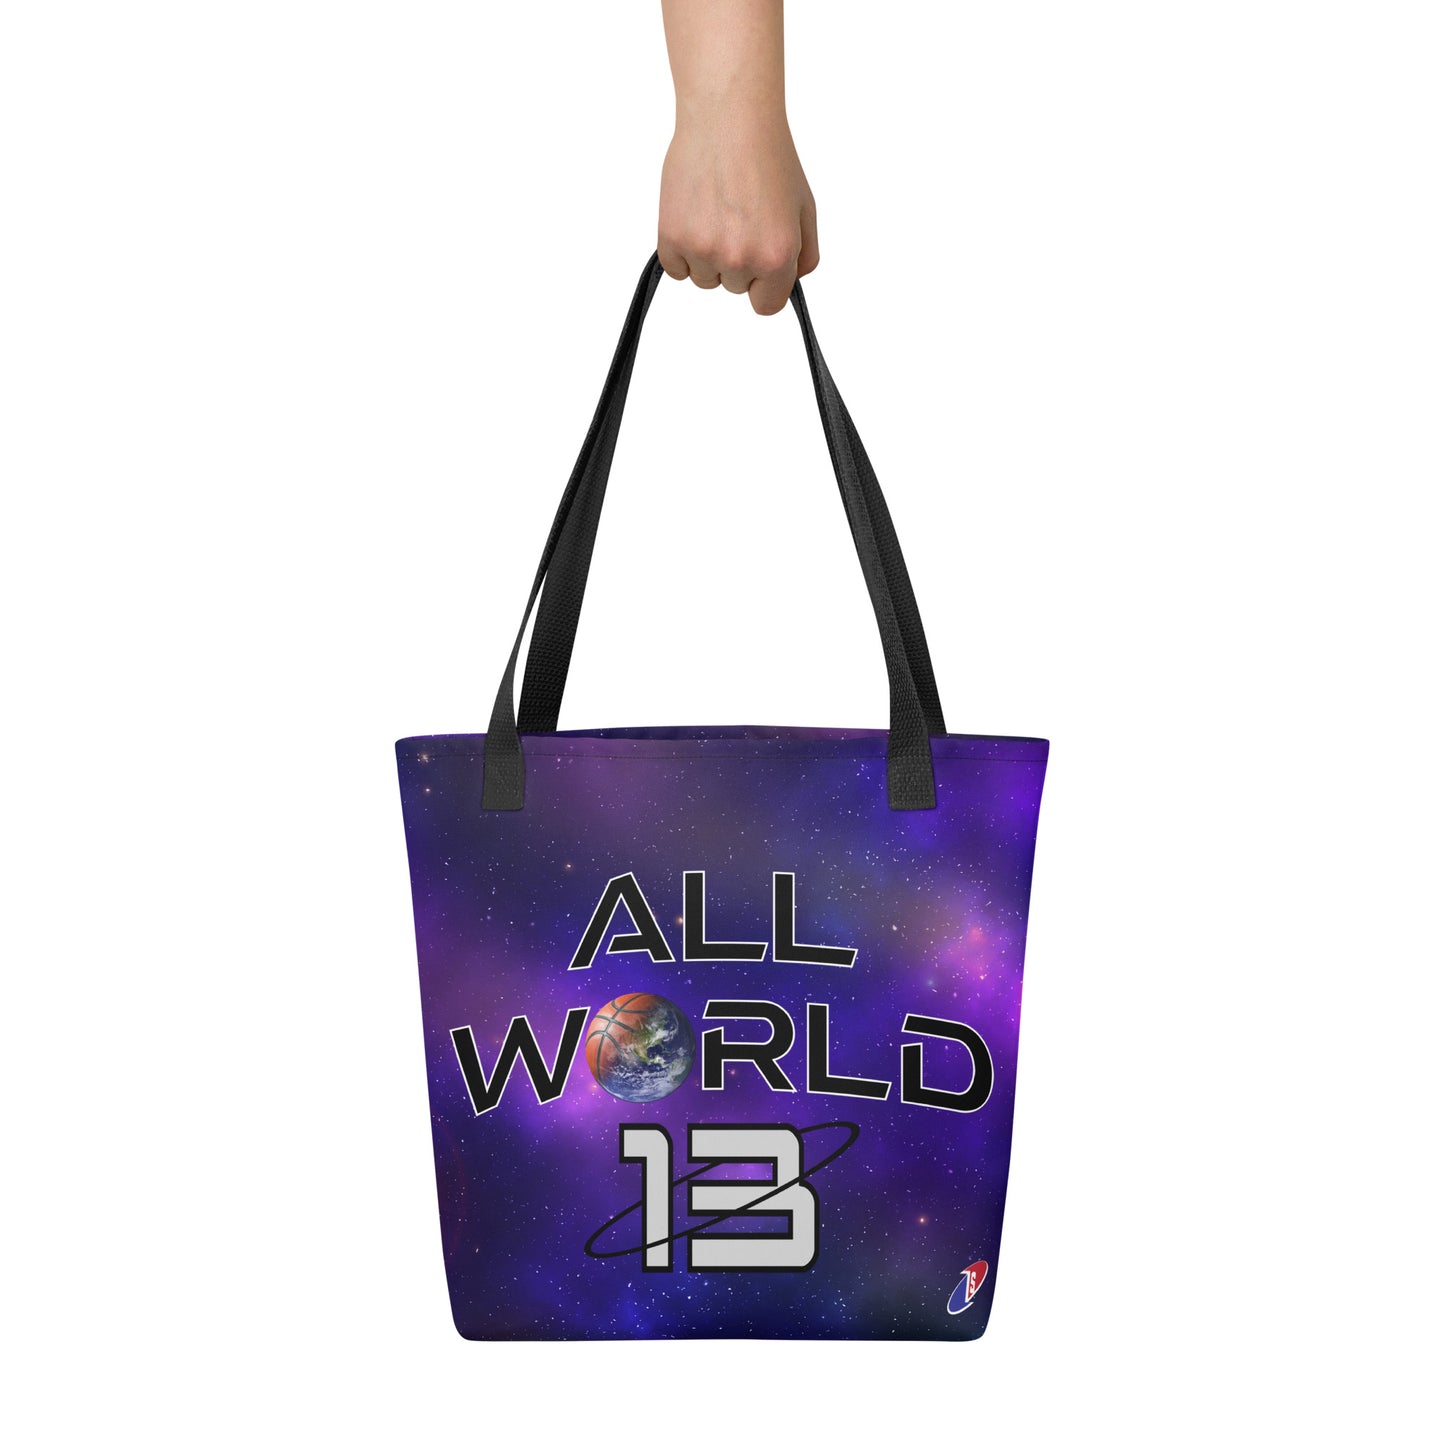 All World Galaxy Tote bag (Customize)